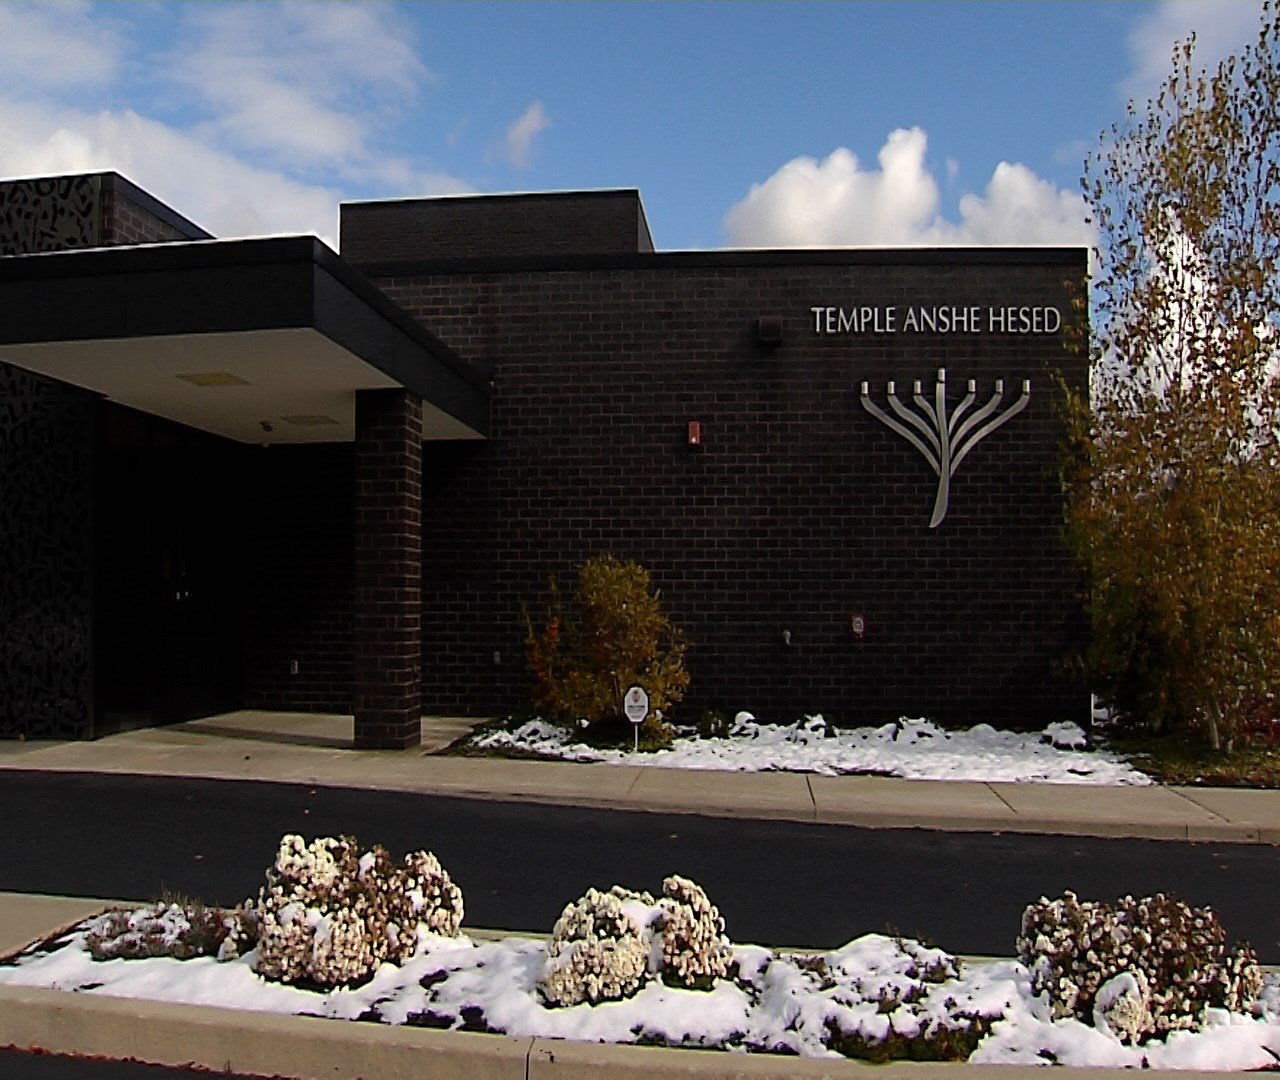 Rabbi at Temple Anshe Hesed Responds to Rise in Antisemitism